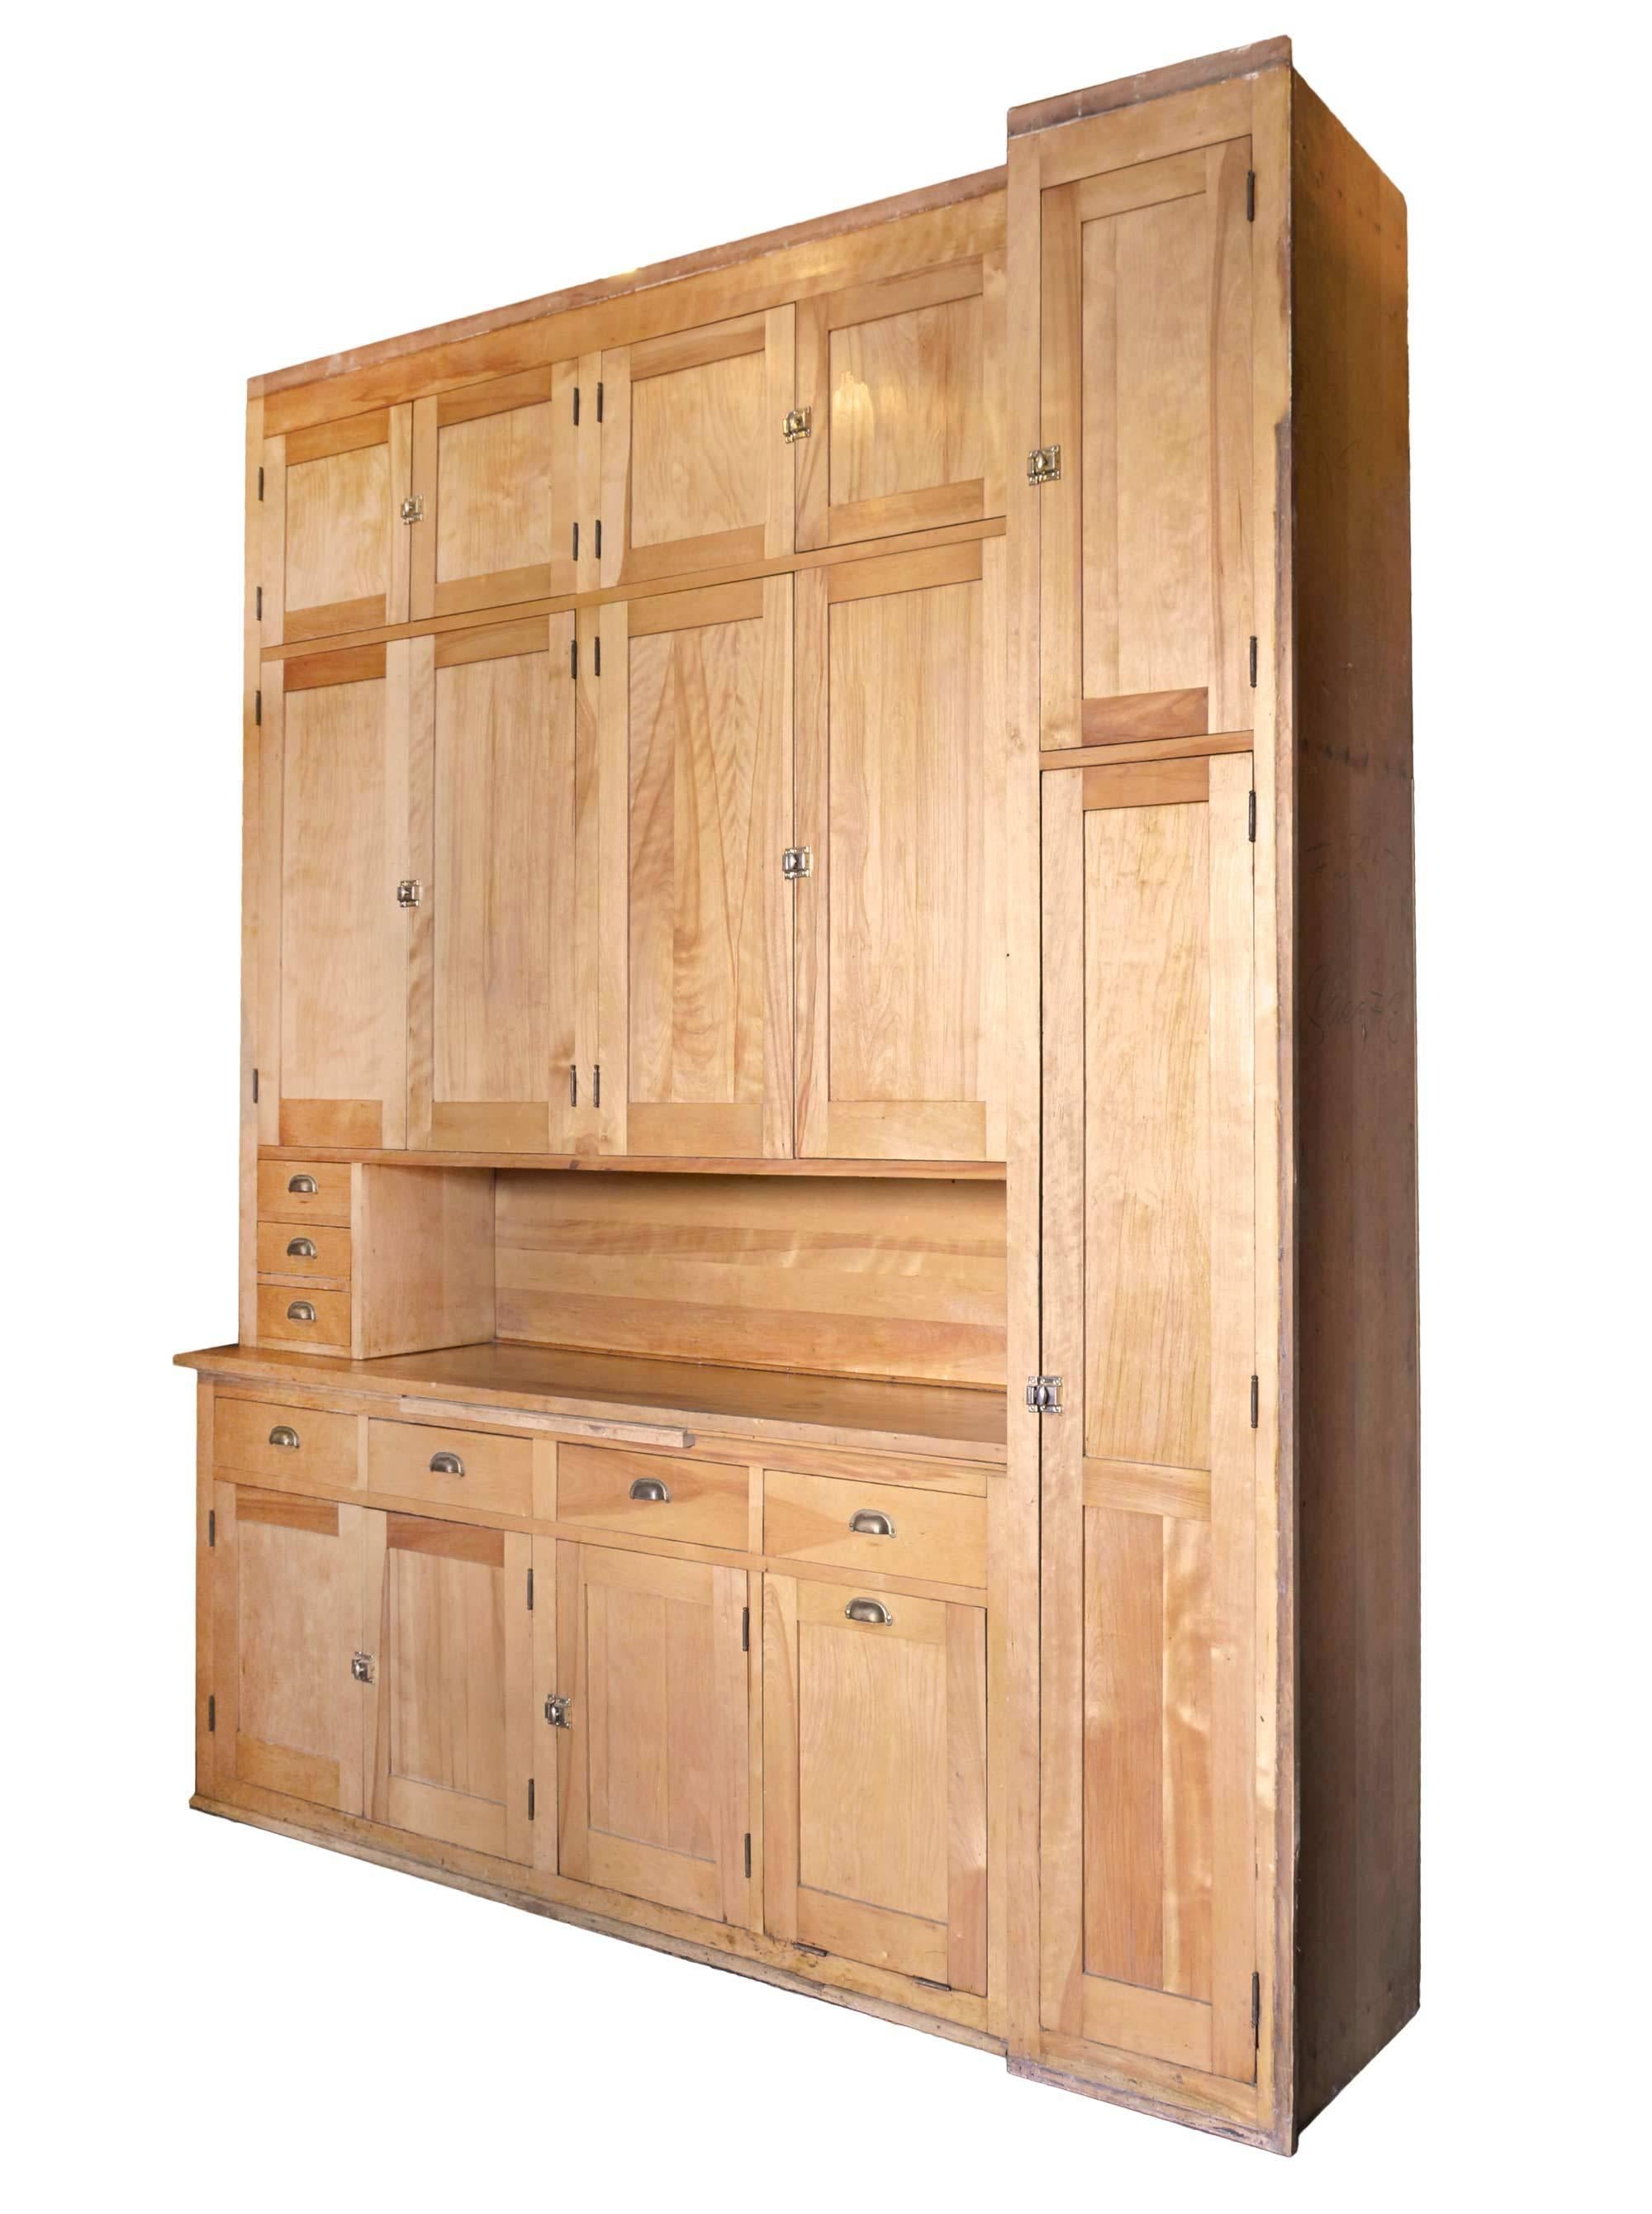 This maple kitchen cabinet has been well cared for, for the last 100 years. It has its beautiful original finish that features the lovely warm figure of maple, bead board back and original brass hardware. Great for storage with multiple drawers and